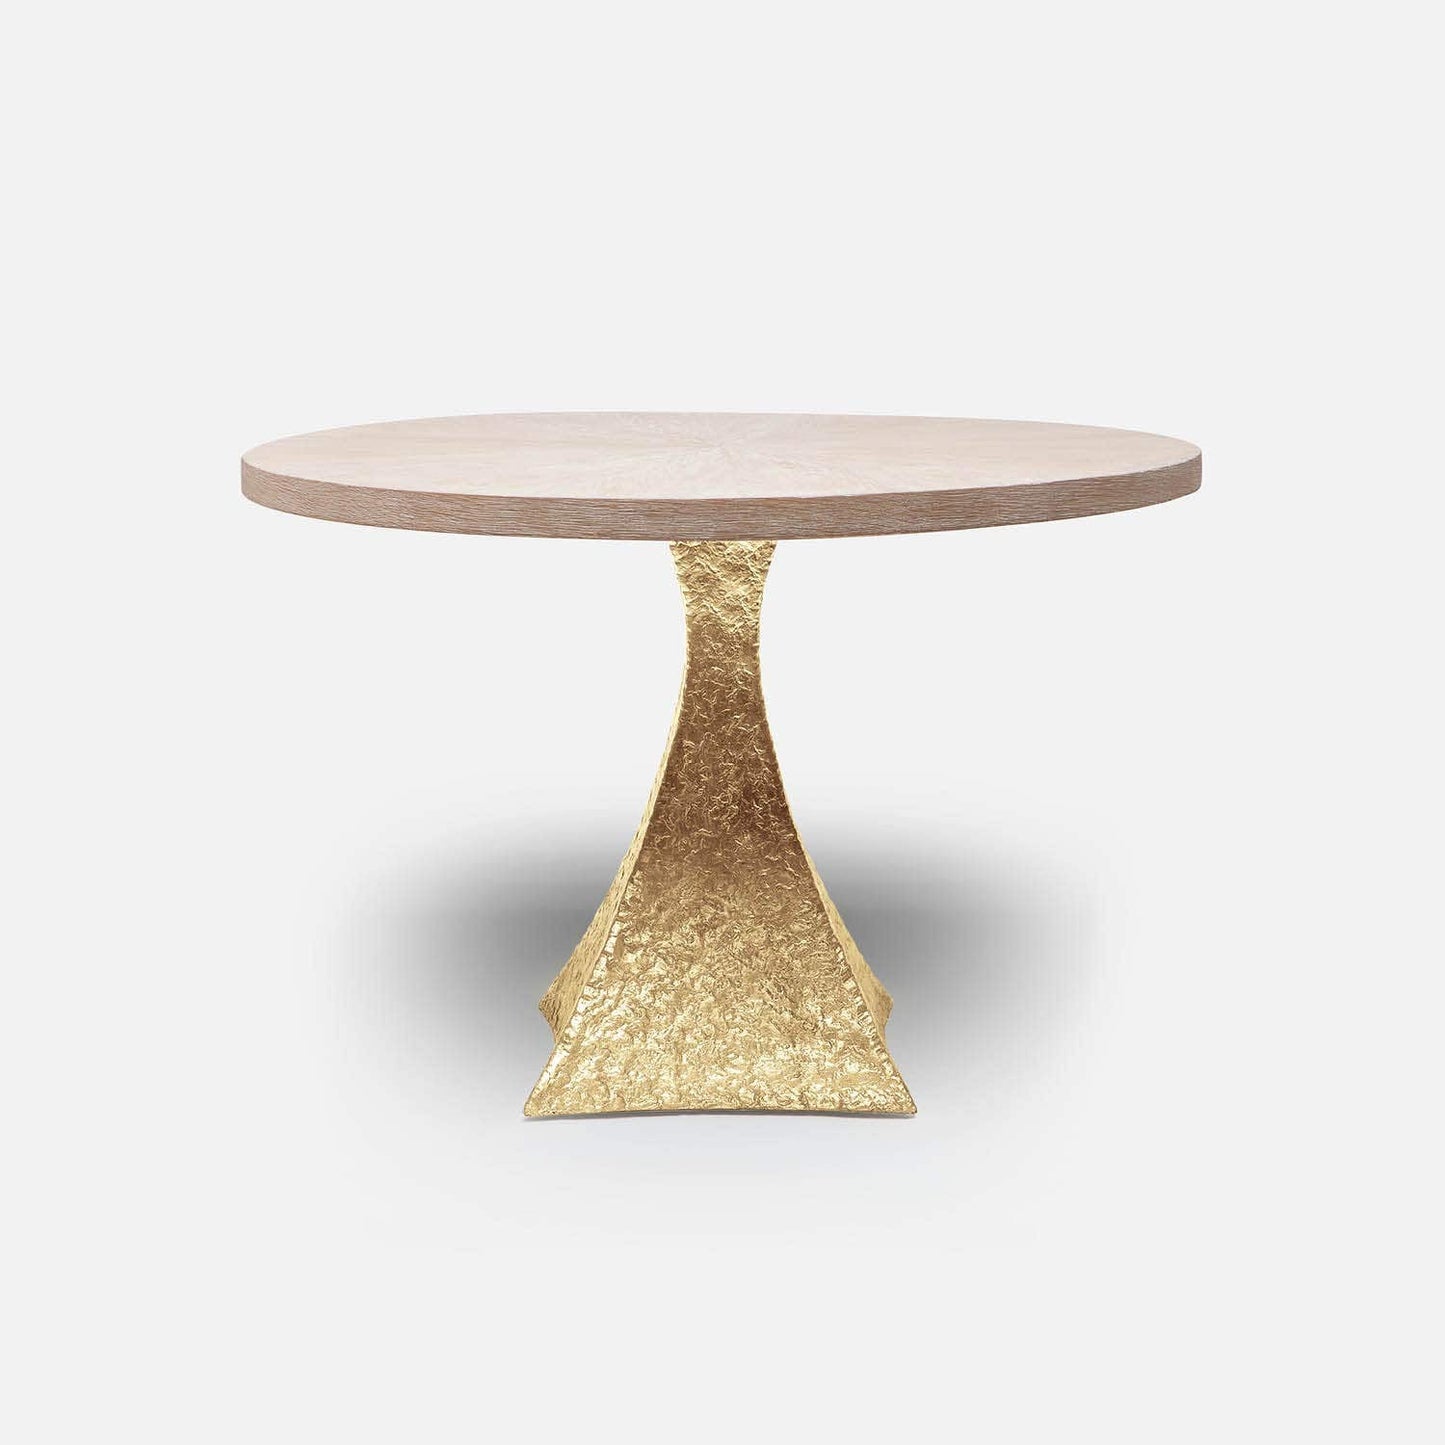 Made Goods Noor 72" x 30" Bumpy Cool Gold Iron Dinning Table With Round White Cerused Oak Table Top